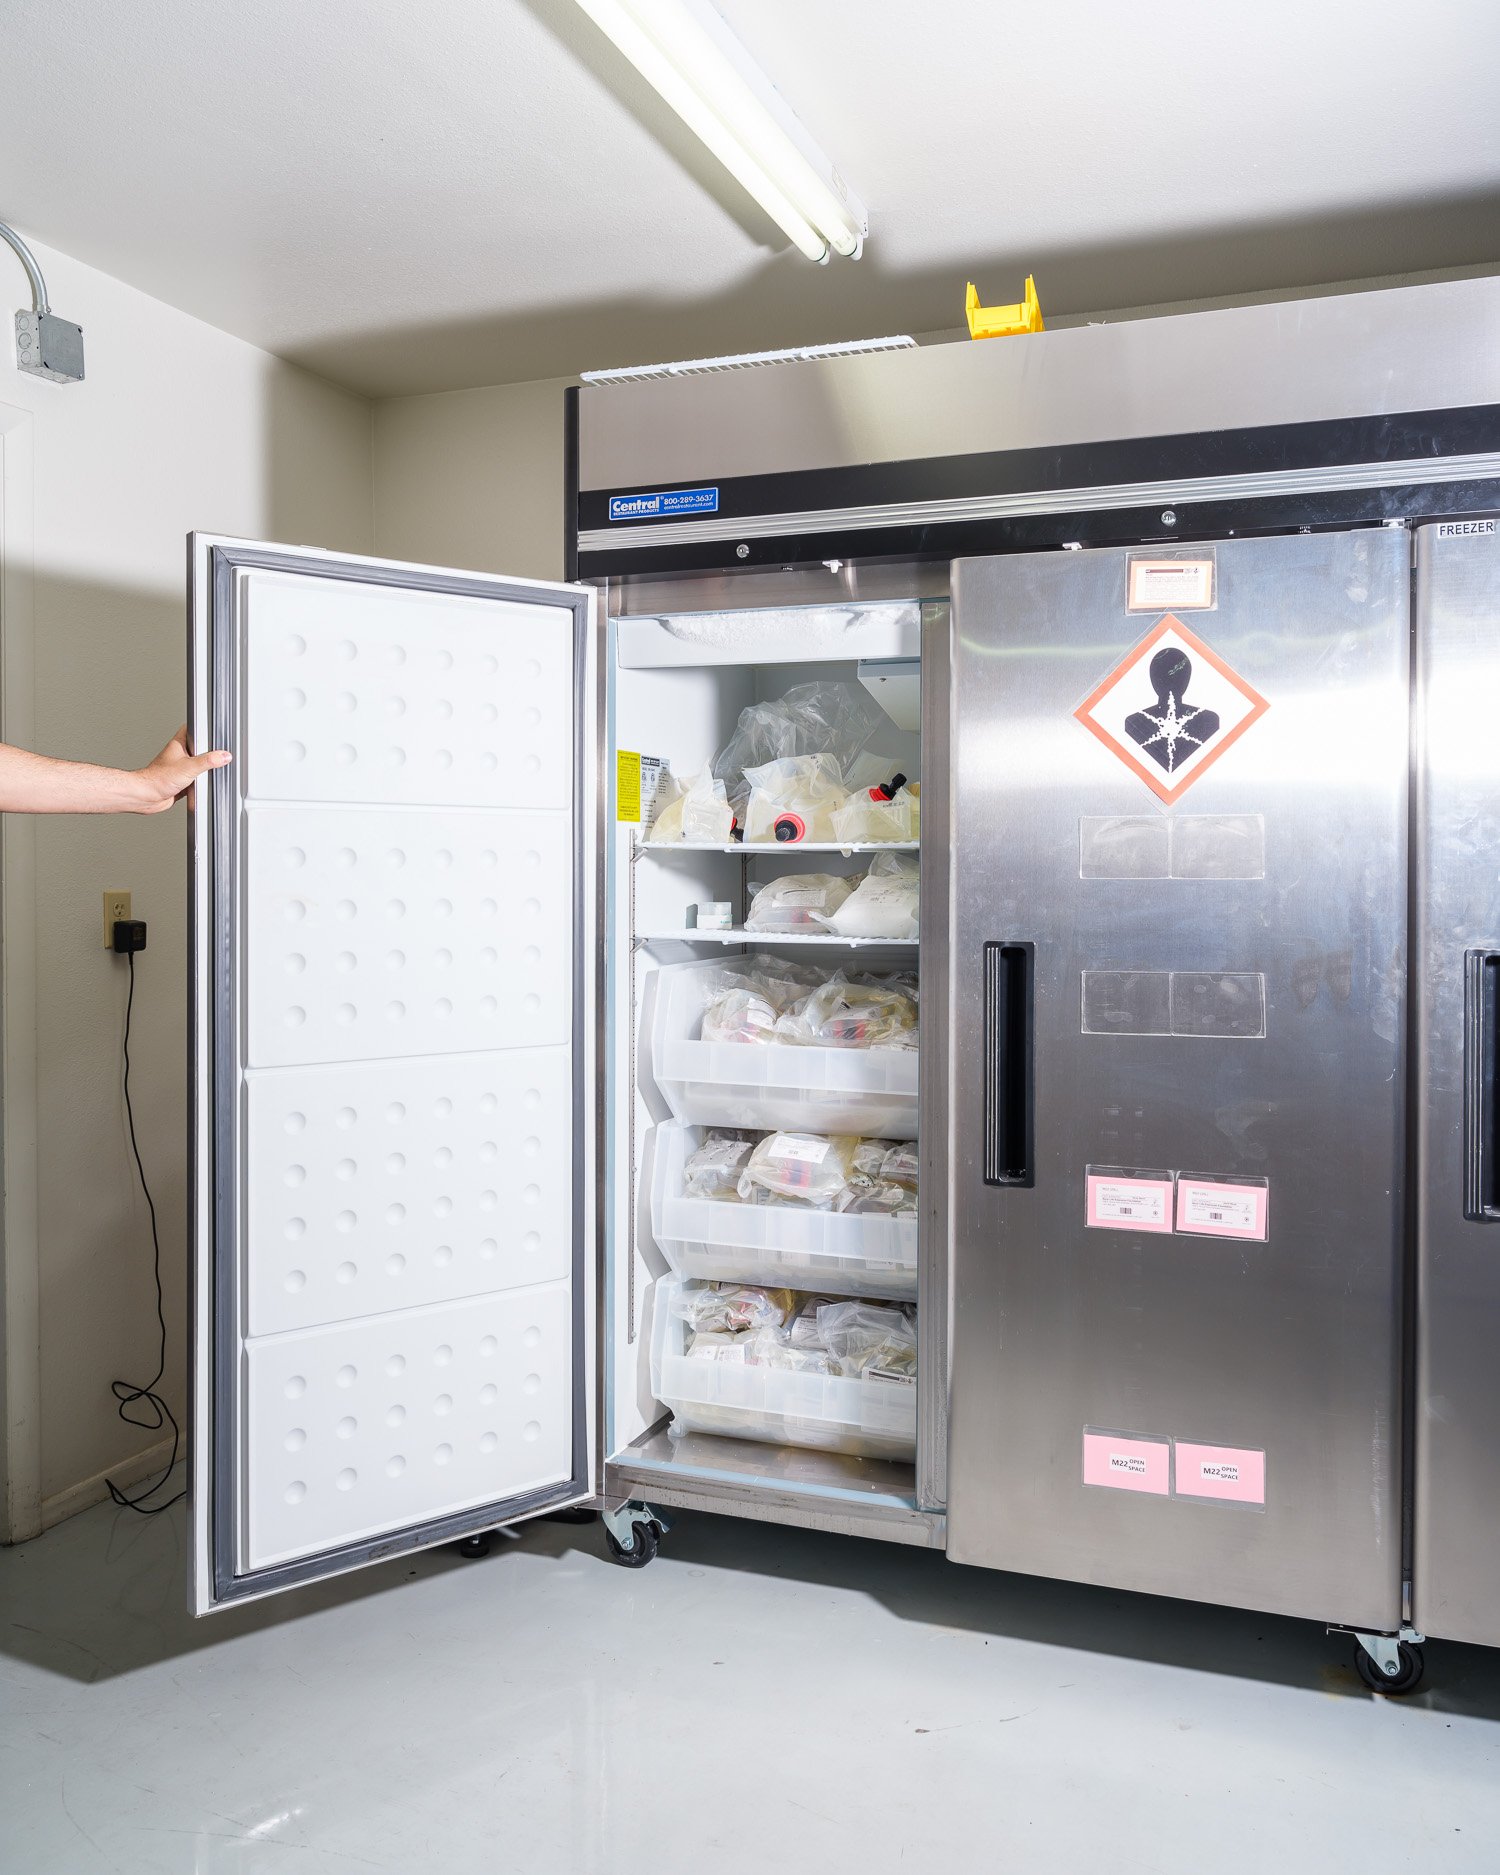  A fridge full of M22, the solution used for vitrification of bodies after death. Vitrification helps to prevent the formation of ice crystals and helps prevent cryopreservation damage. In cryonics, vitrification is currently the preferred method to 